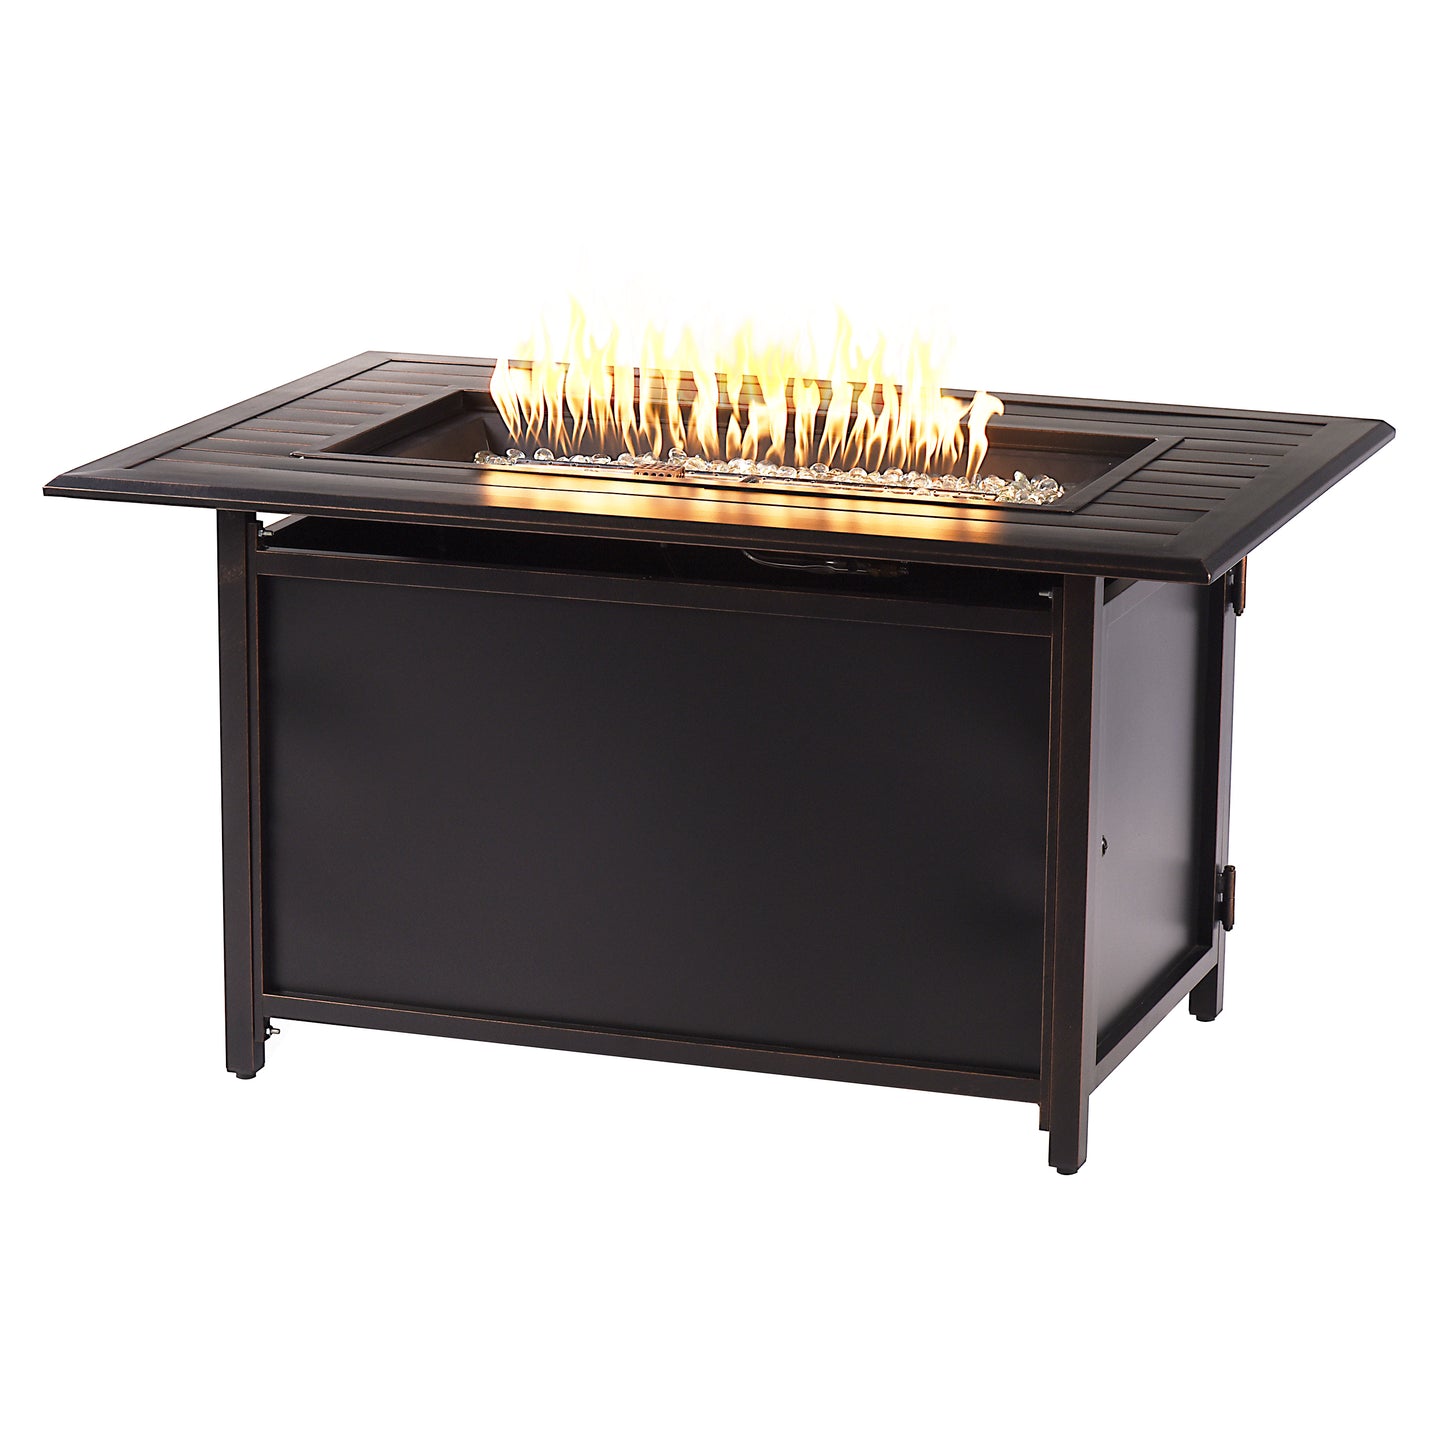 Aluminum 46-in Rectangular Propane Fire Table, Beads, Covers and Lid